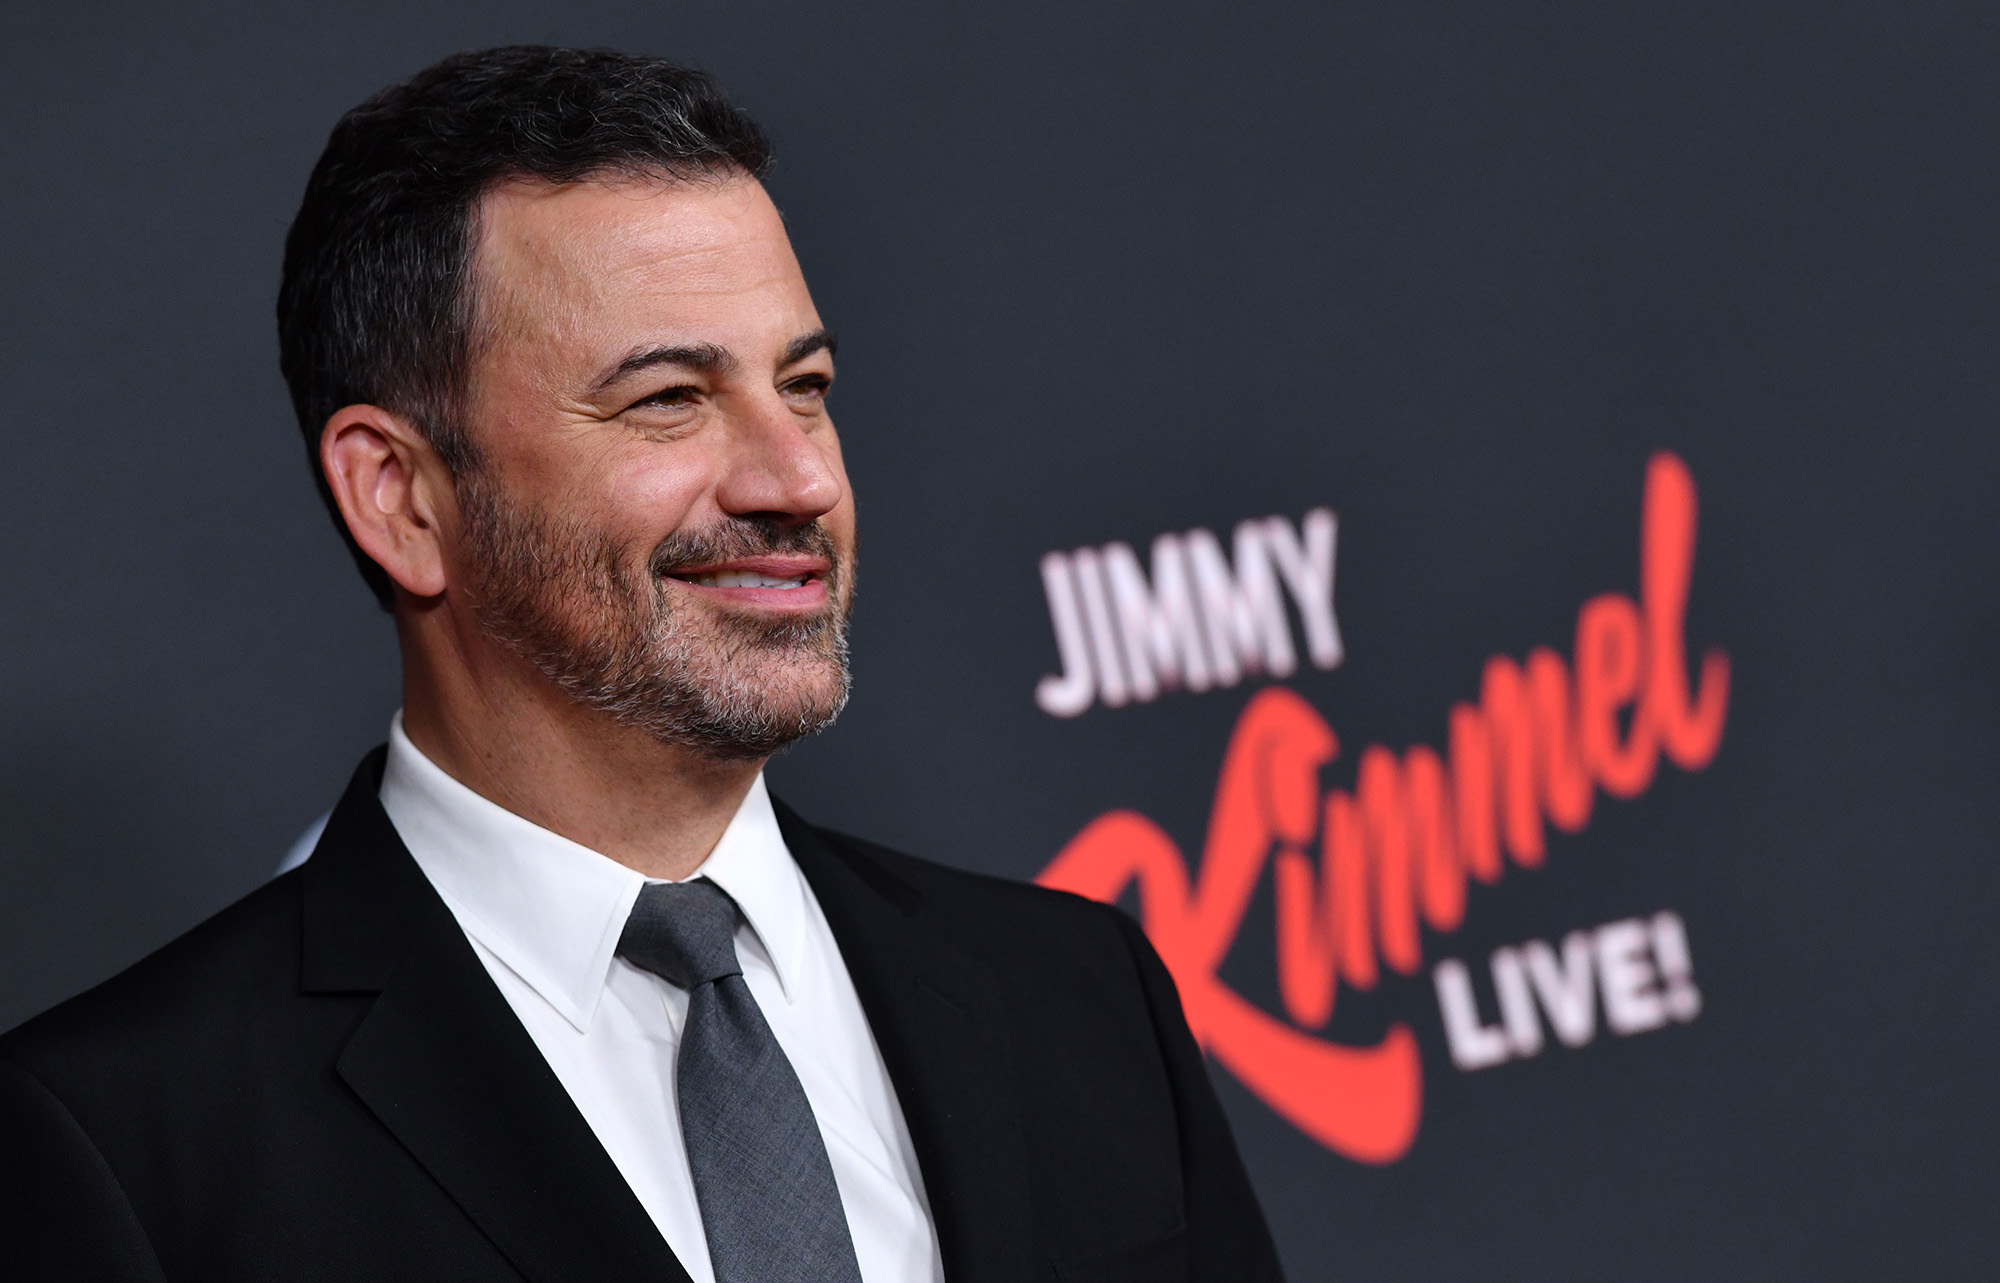 Collectibles Firm Rally Valued at $175 Million, Backed by Jimmy Kimmel ...